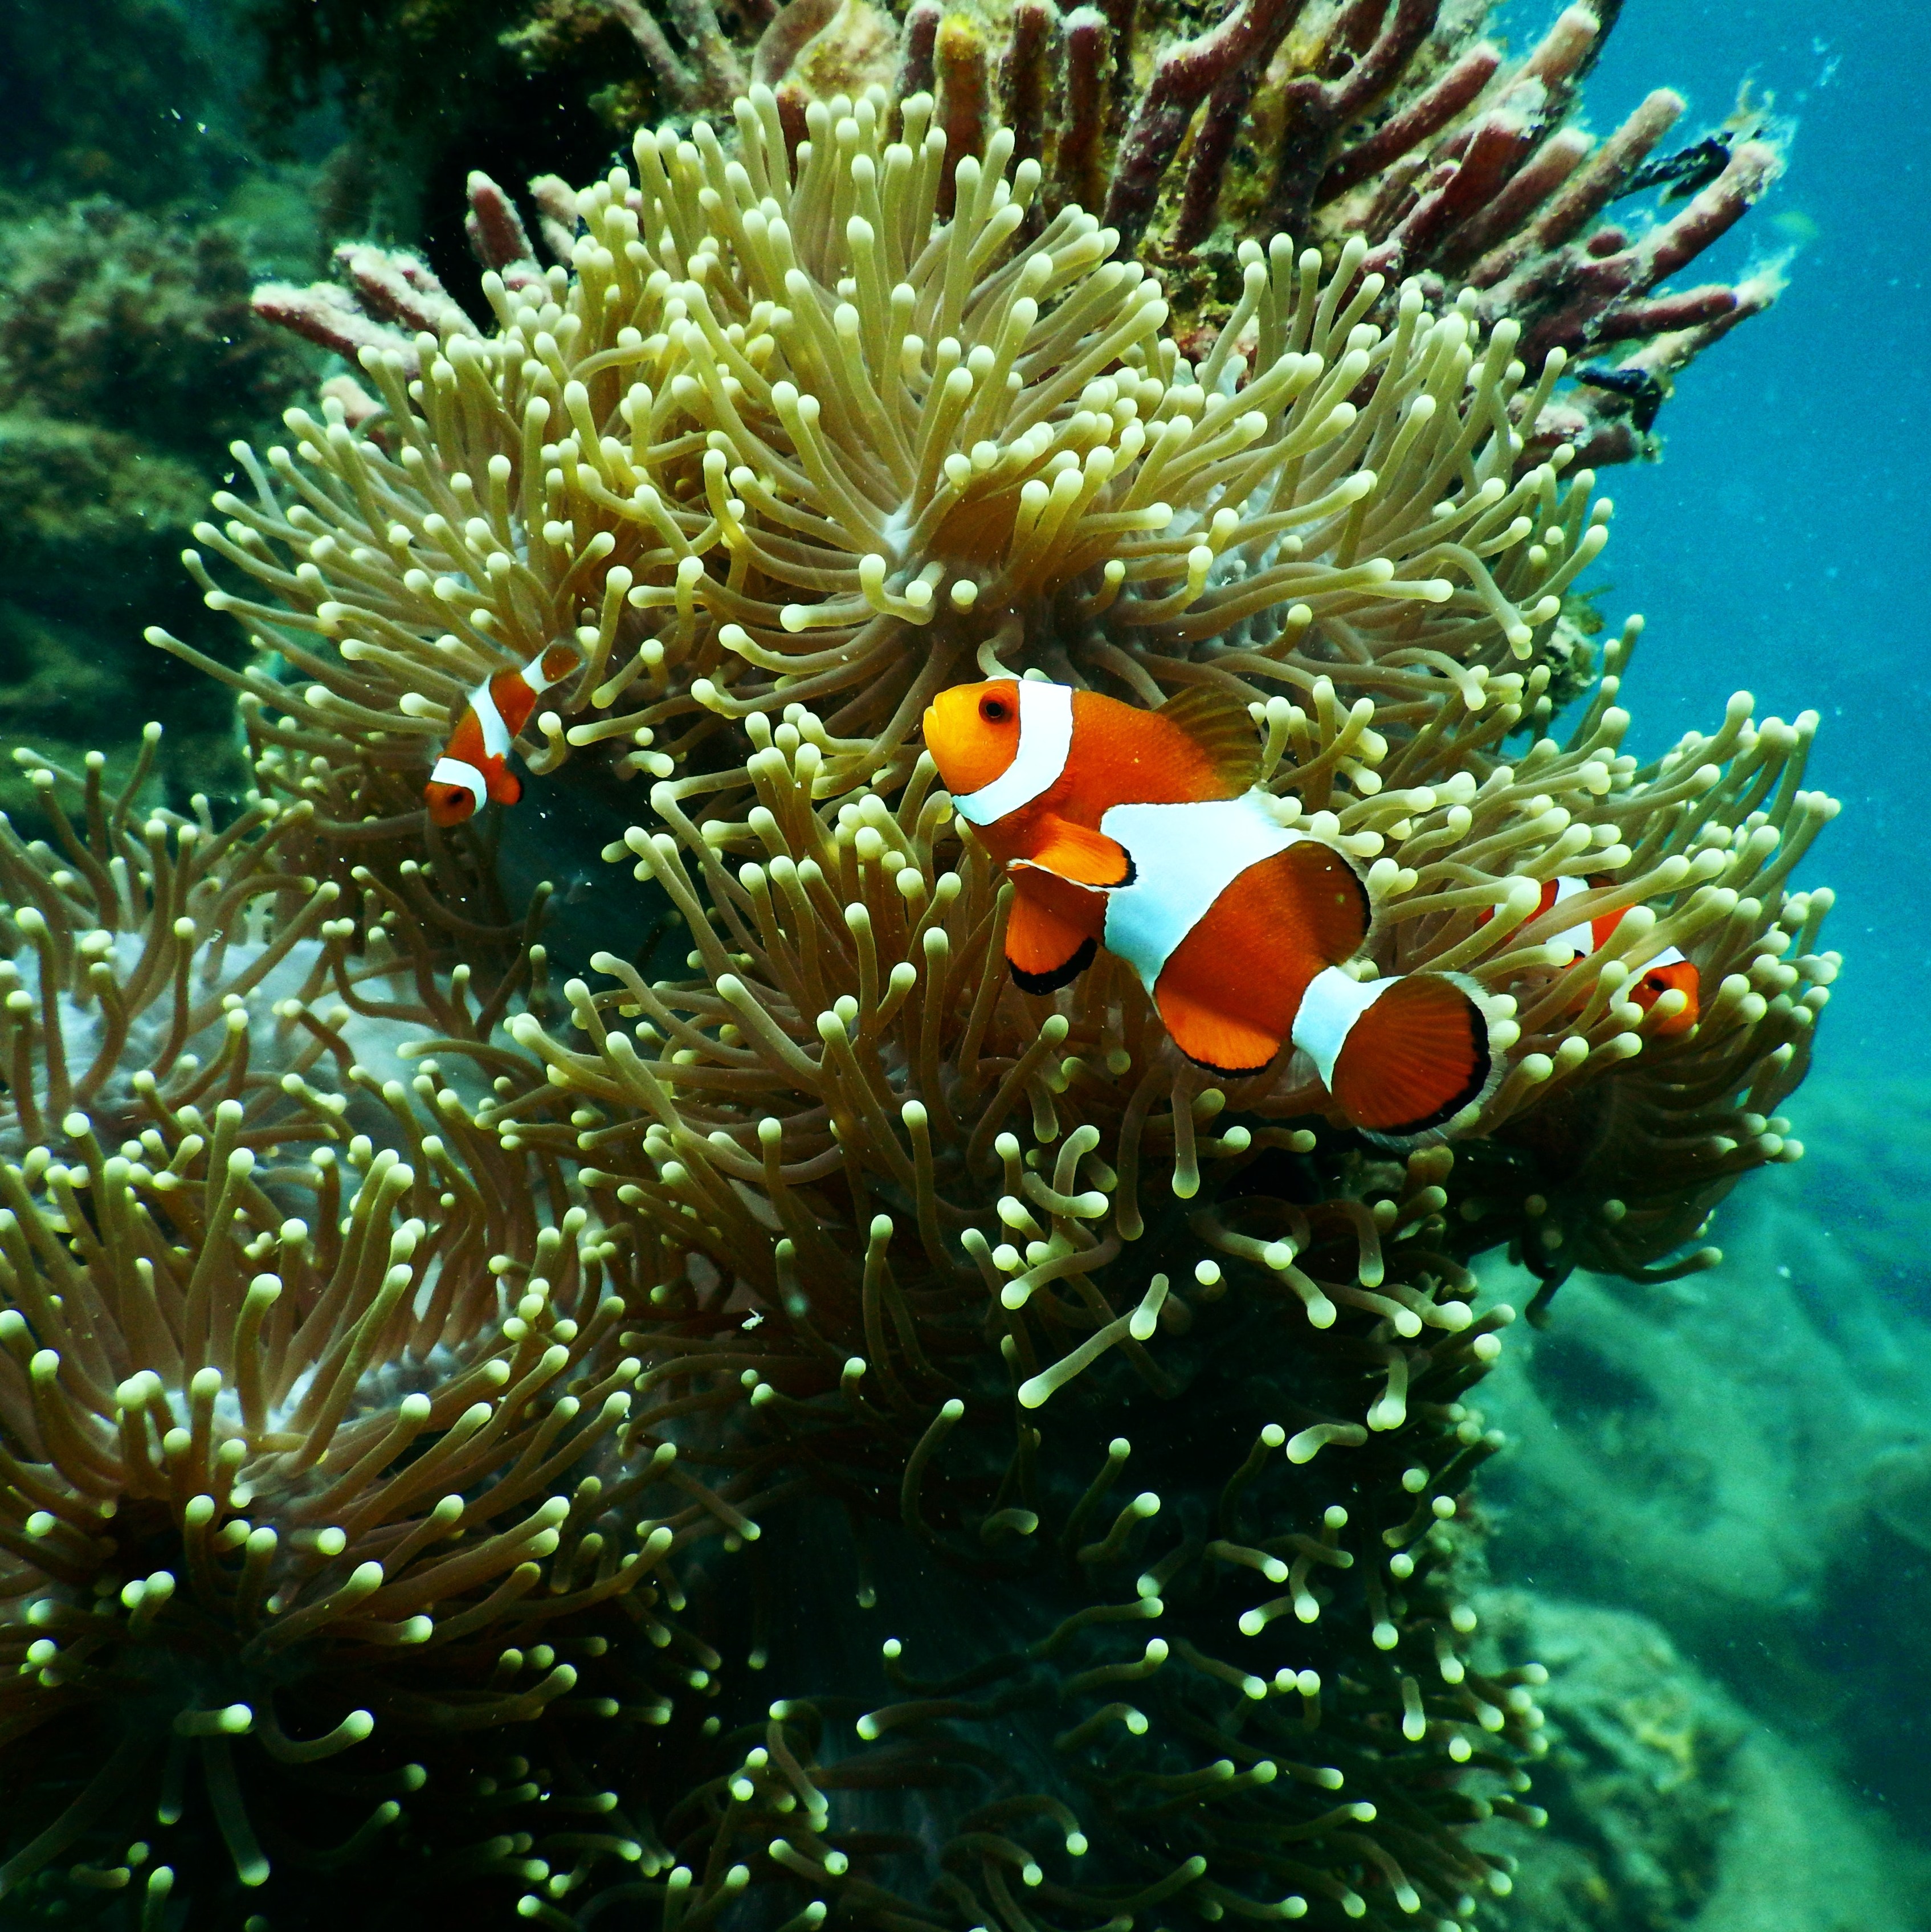 https://www.pexels.com/photo/red-and-white-clownfish-under-water-1125979/